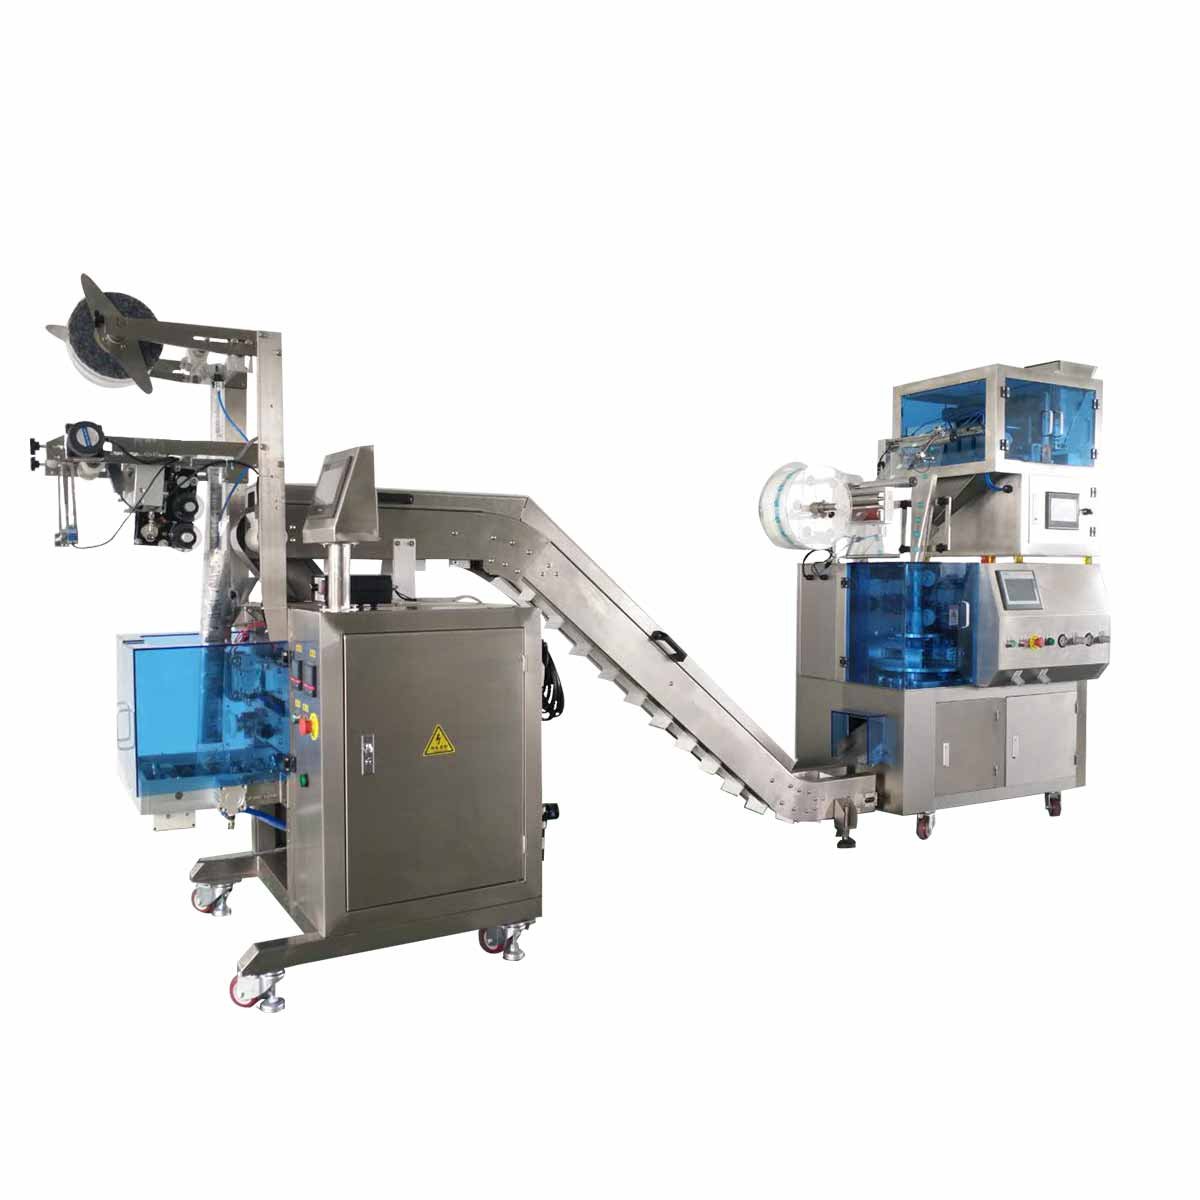 Automatic Drip Coffee Bag Packing Machine with Outer Envelope | Drip Coffee Bag  Packing Machine, Tea Bag Packing Machine, Englisht Breakfast Tea Capsules  Packing Machine